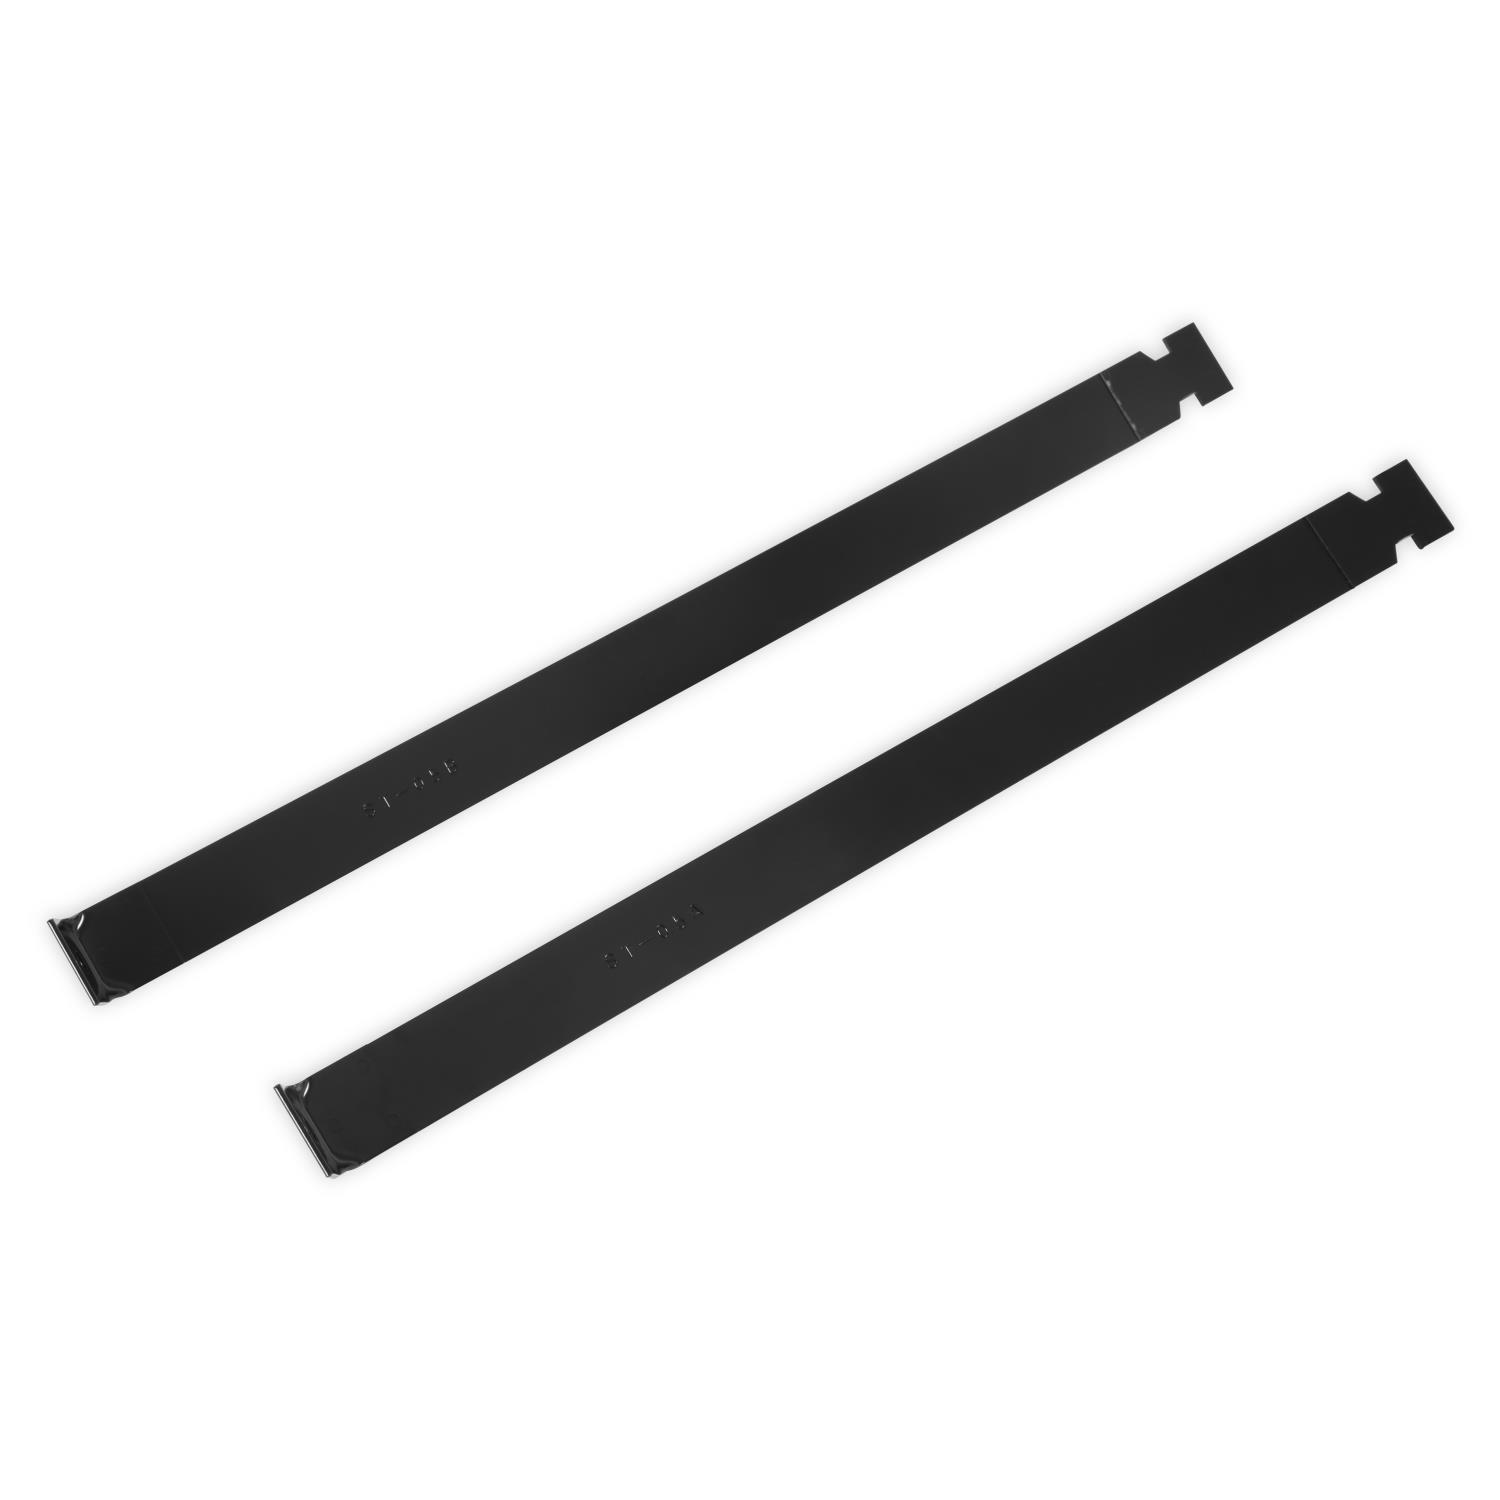 19-581 Stock Replacement Fuel Tank Straps for 1990-1997 Ford F-150 Long Bed